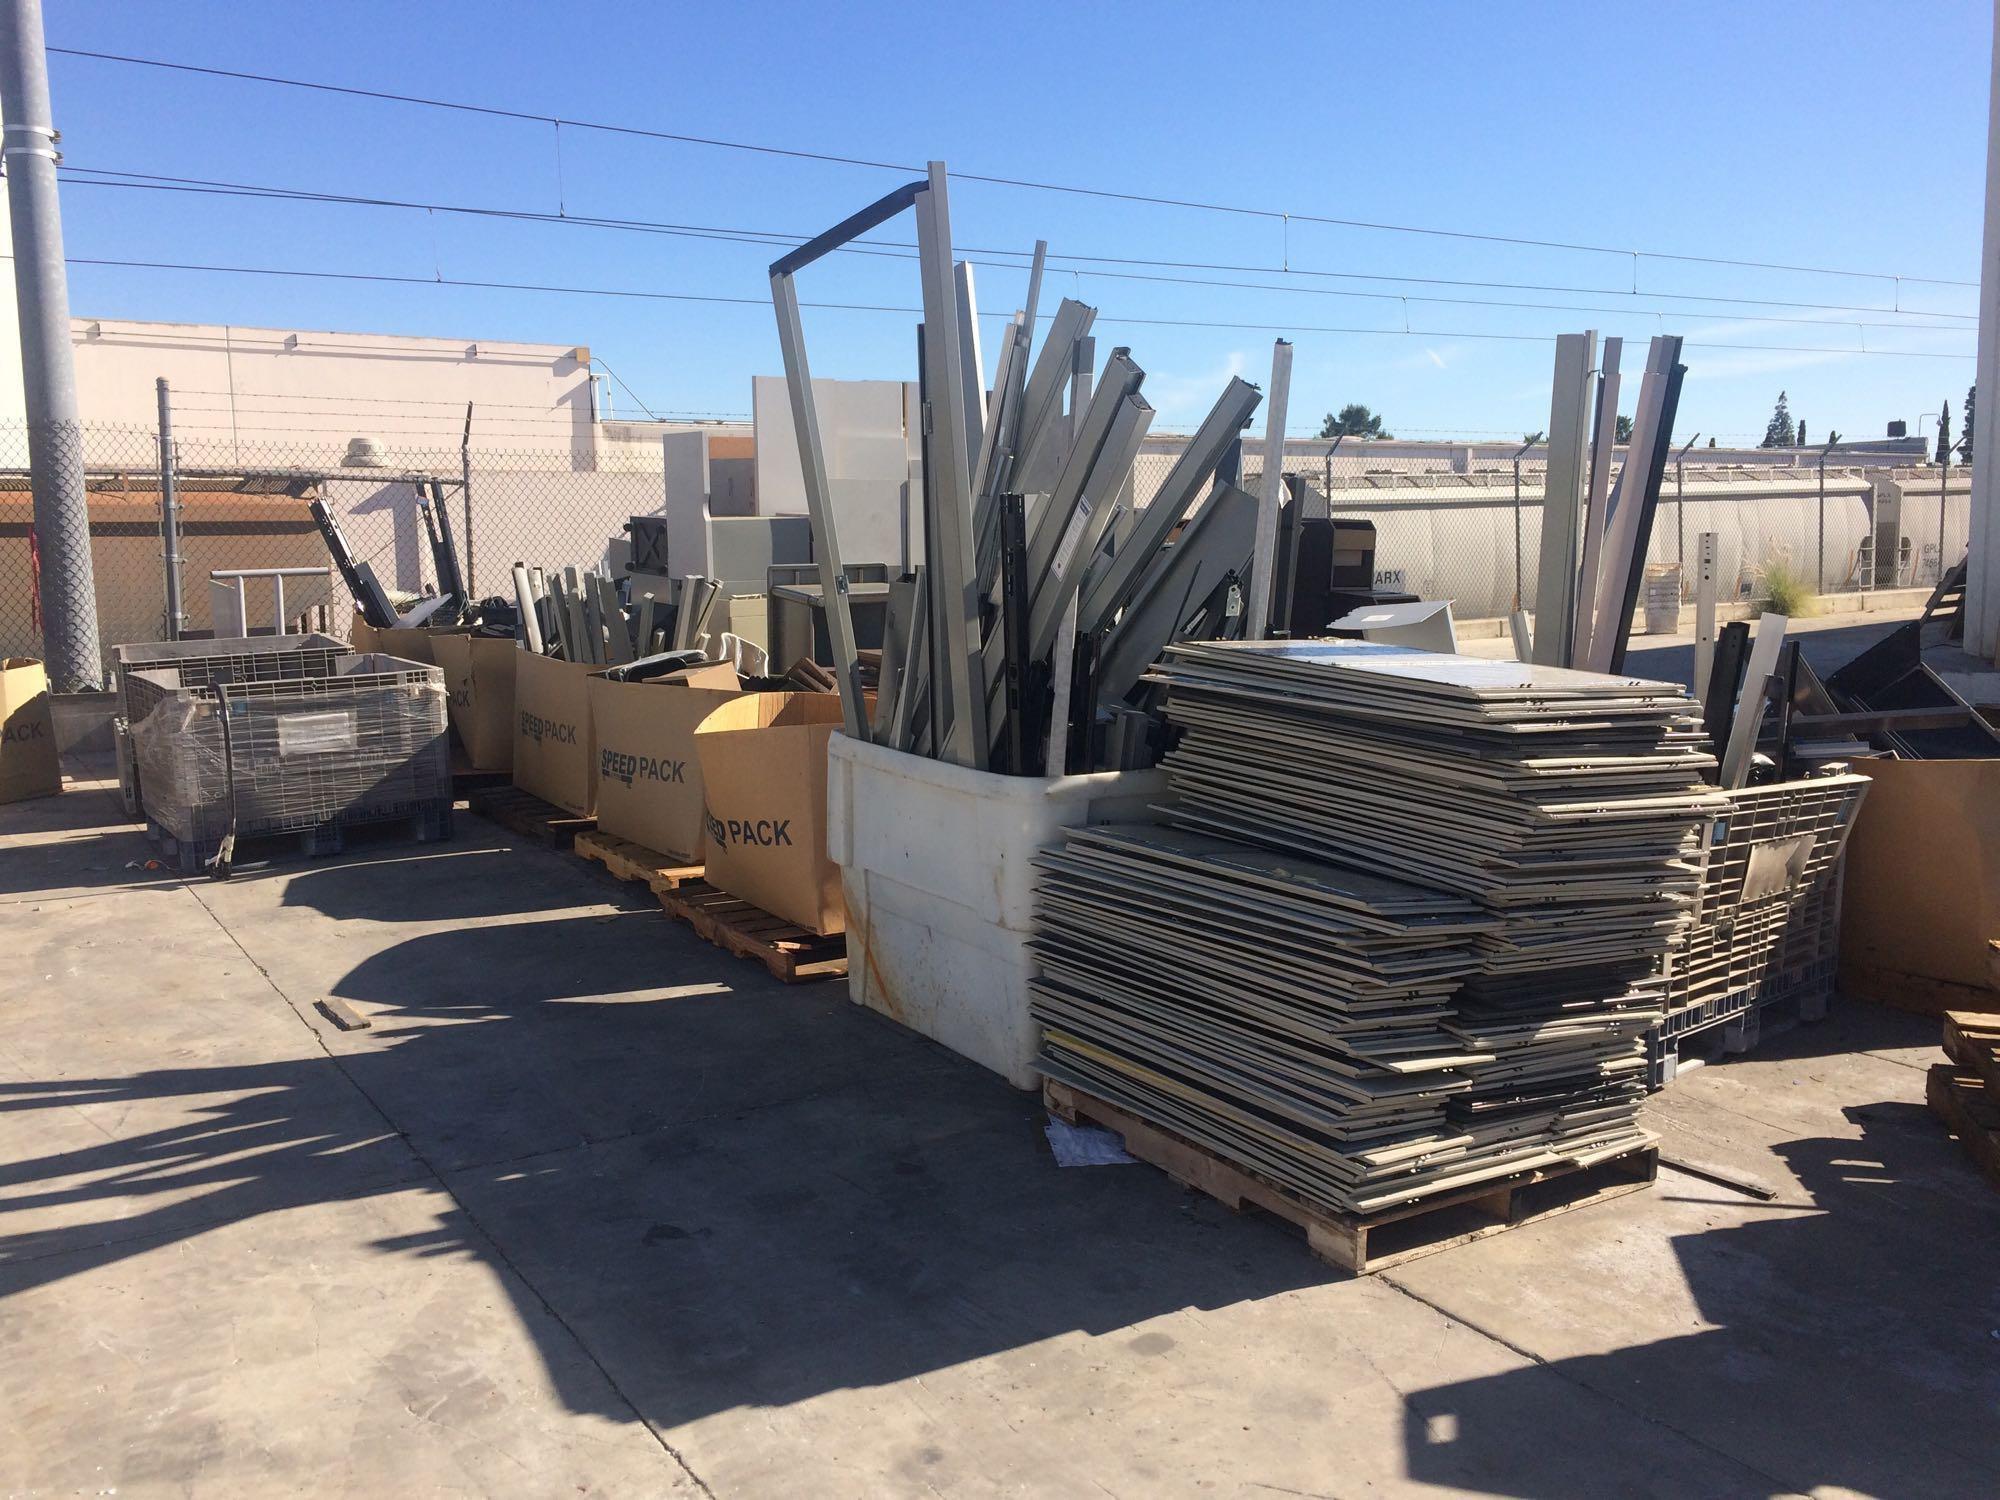 SCRAP LOT / BUYER MUST REMOVE ALL ITEMS BY 5:30 PM ON WEDNESDAY JANUARY 10TH. STORAGE FEES OF